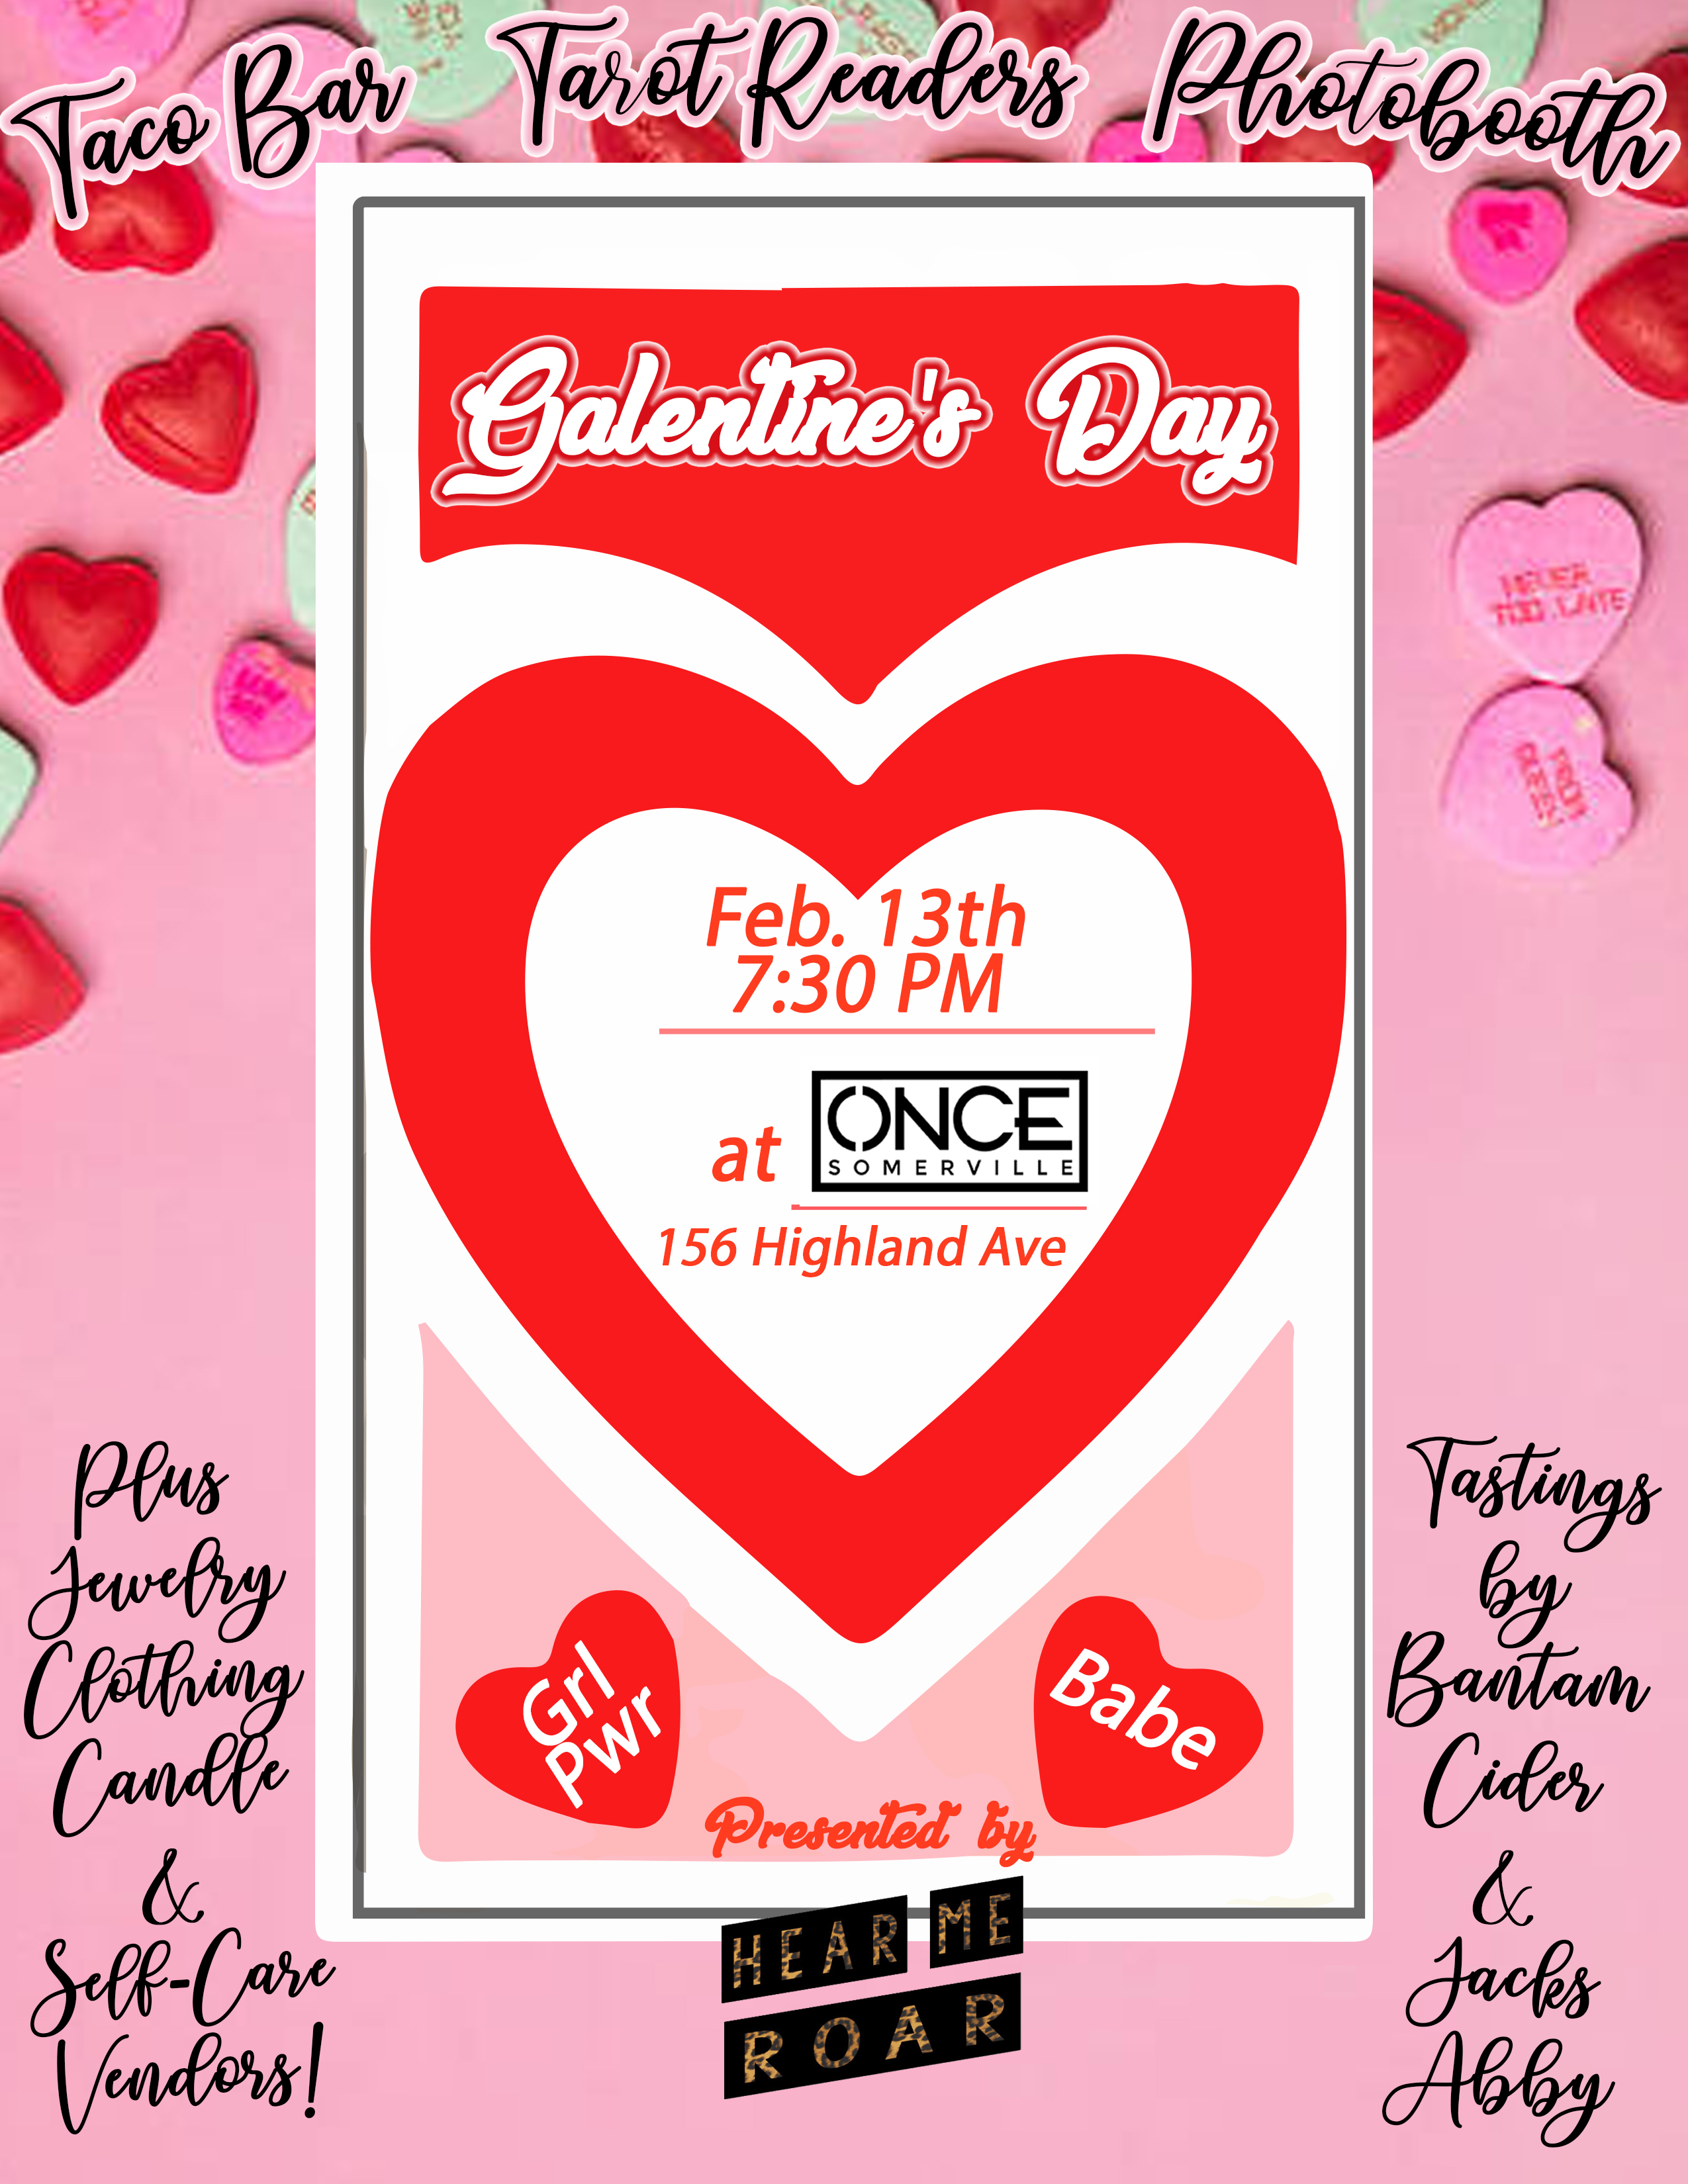 Galentine's Day at ONCE Lounge [02/13/19]